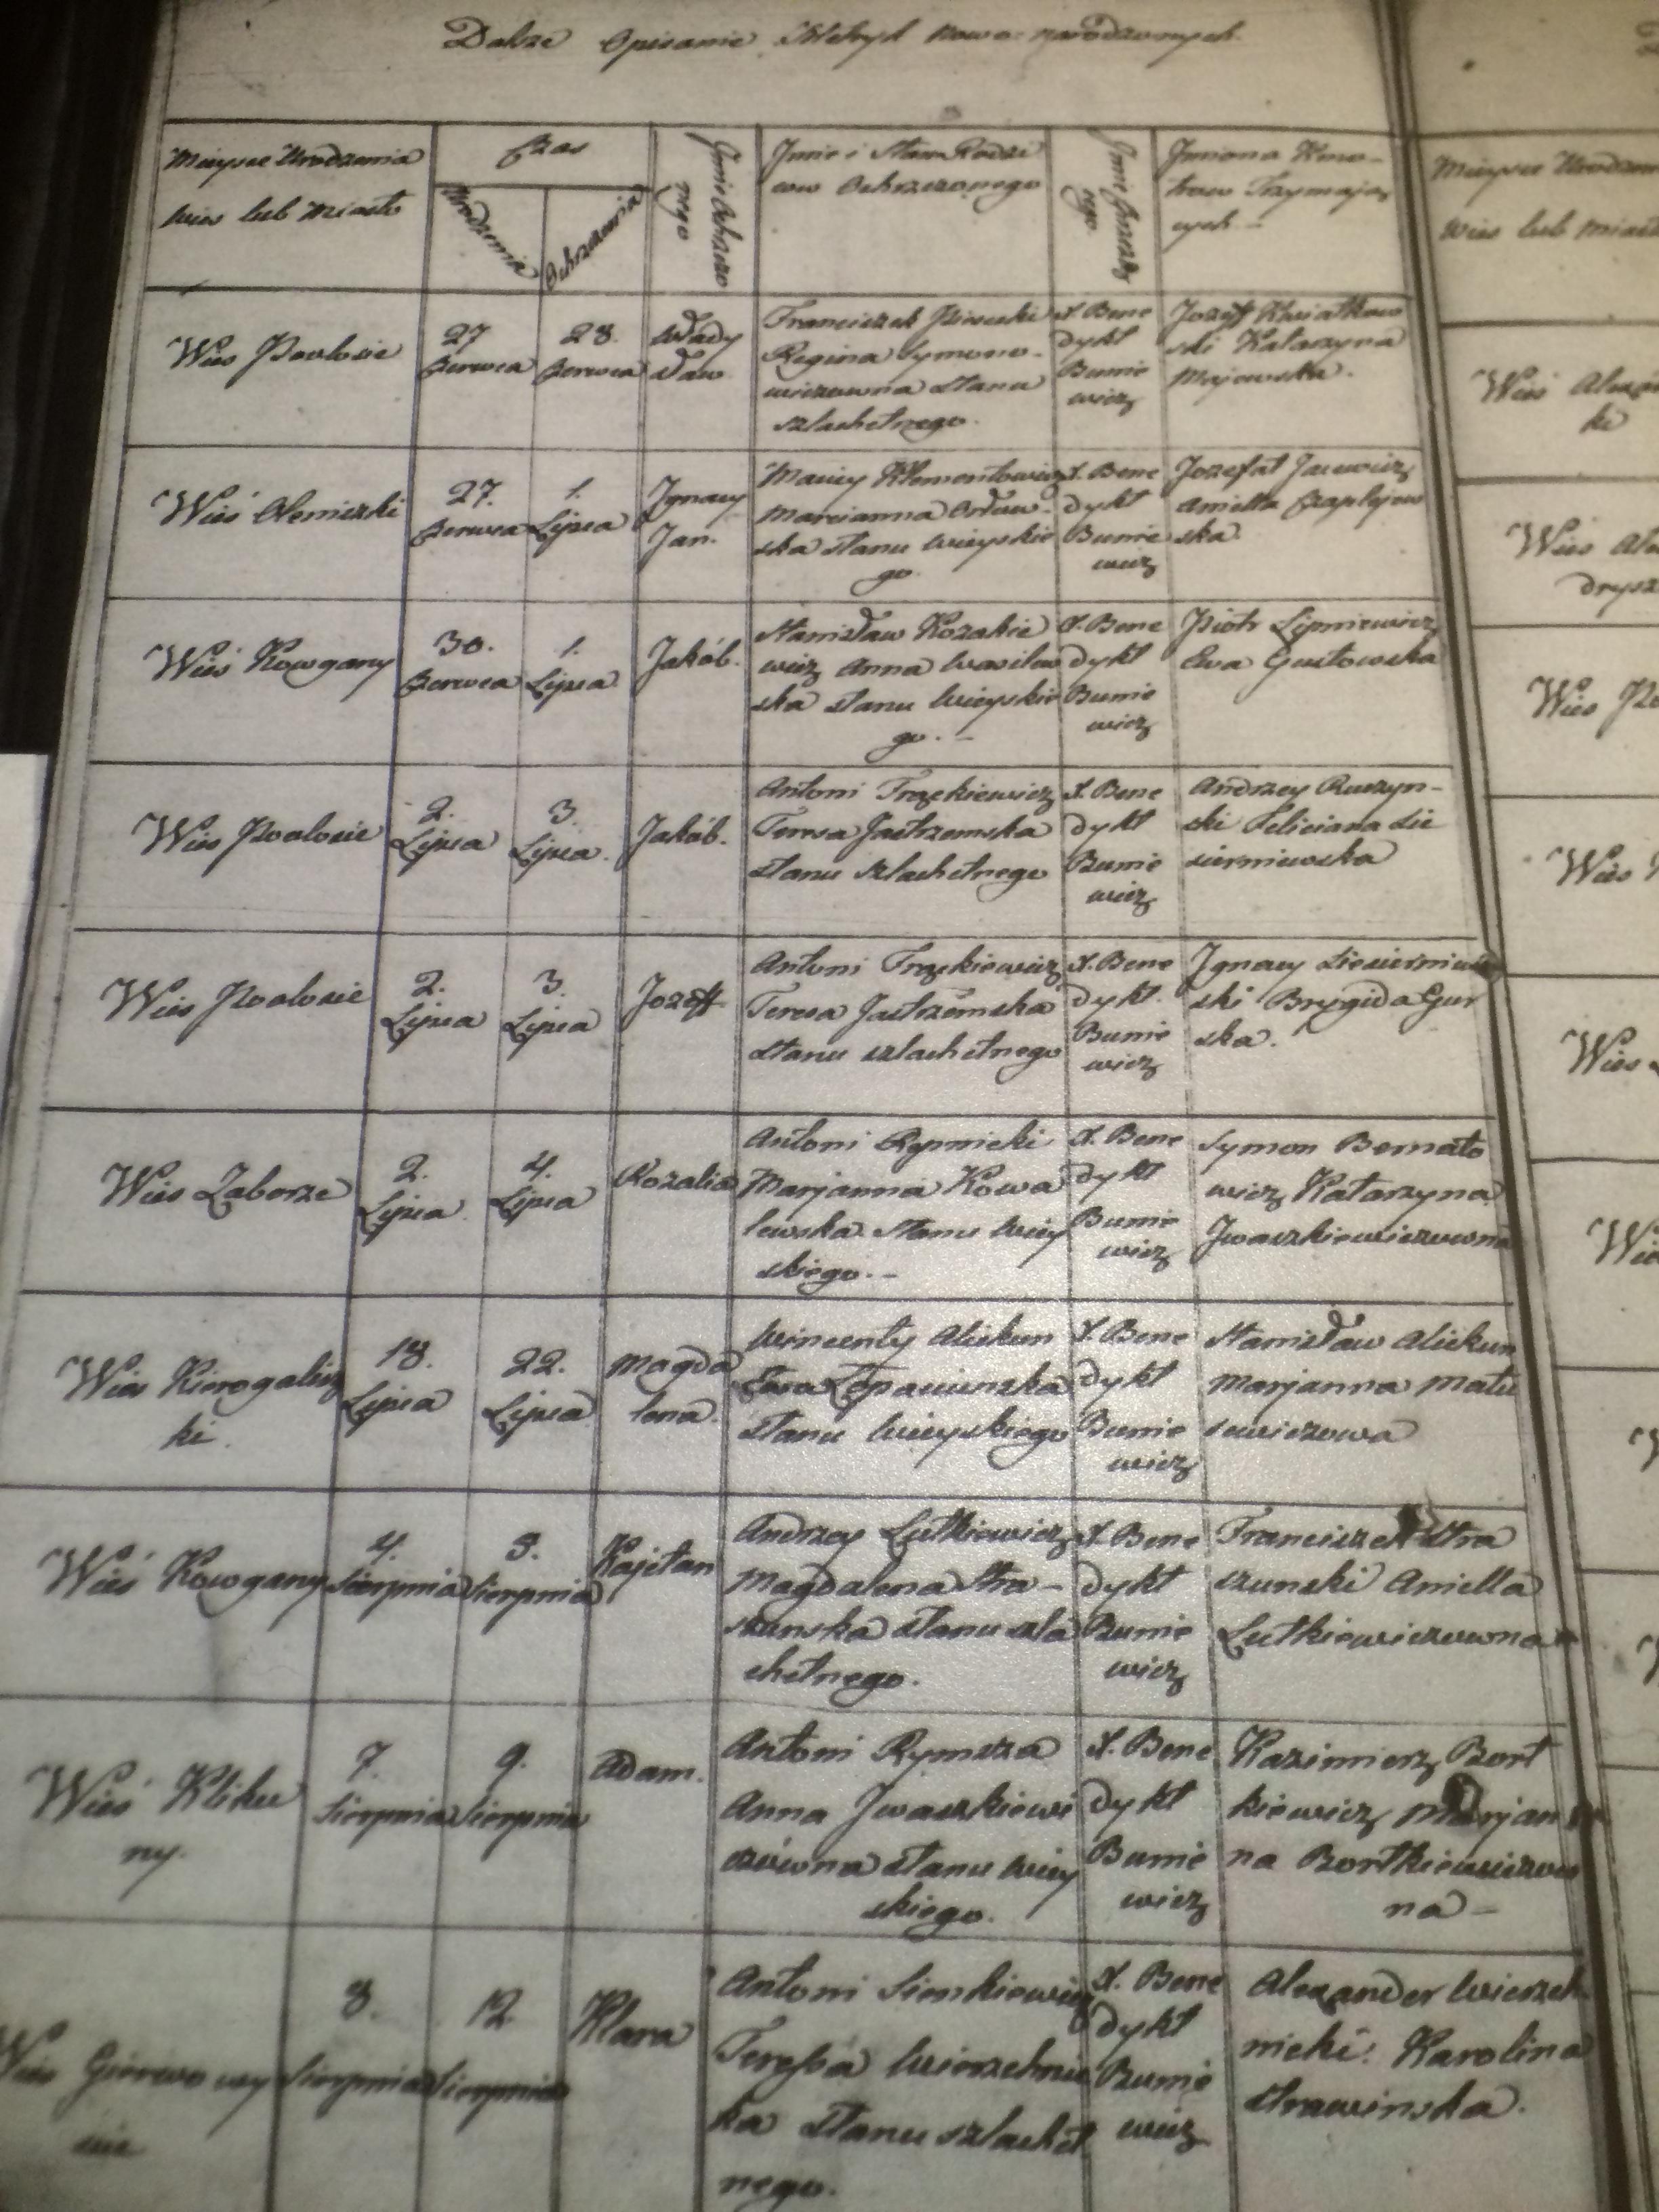 1817 birth and baptism records of Jakub and Jozef Fronckiewicz.jpg